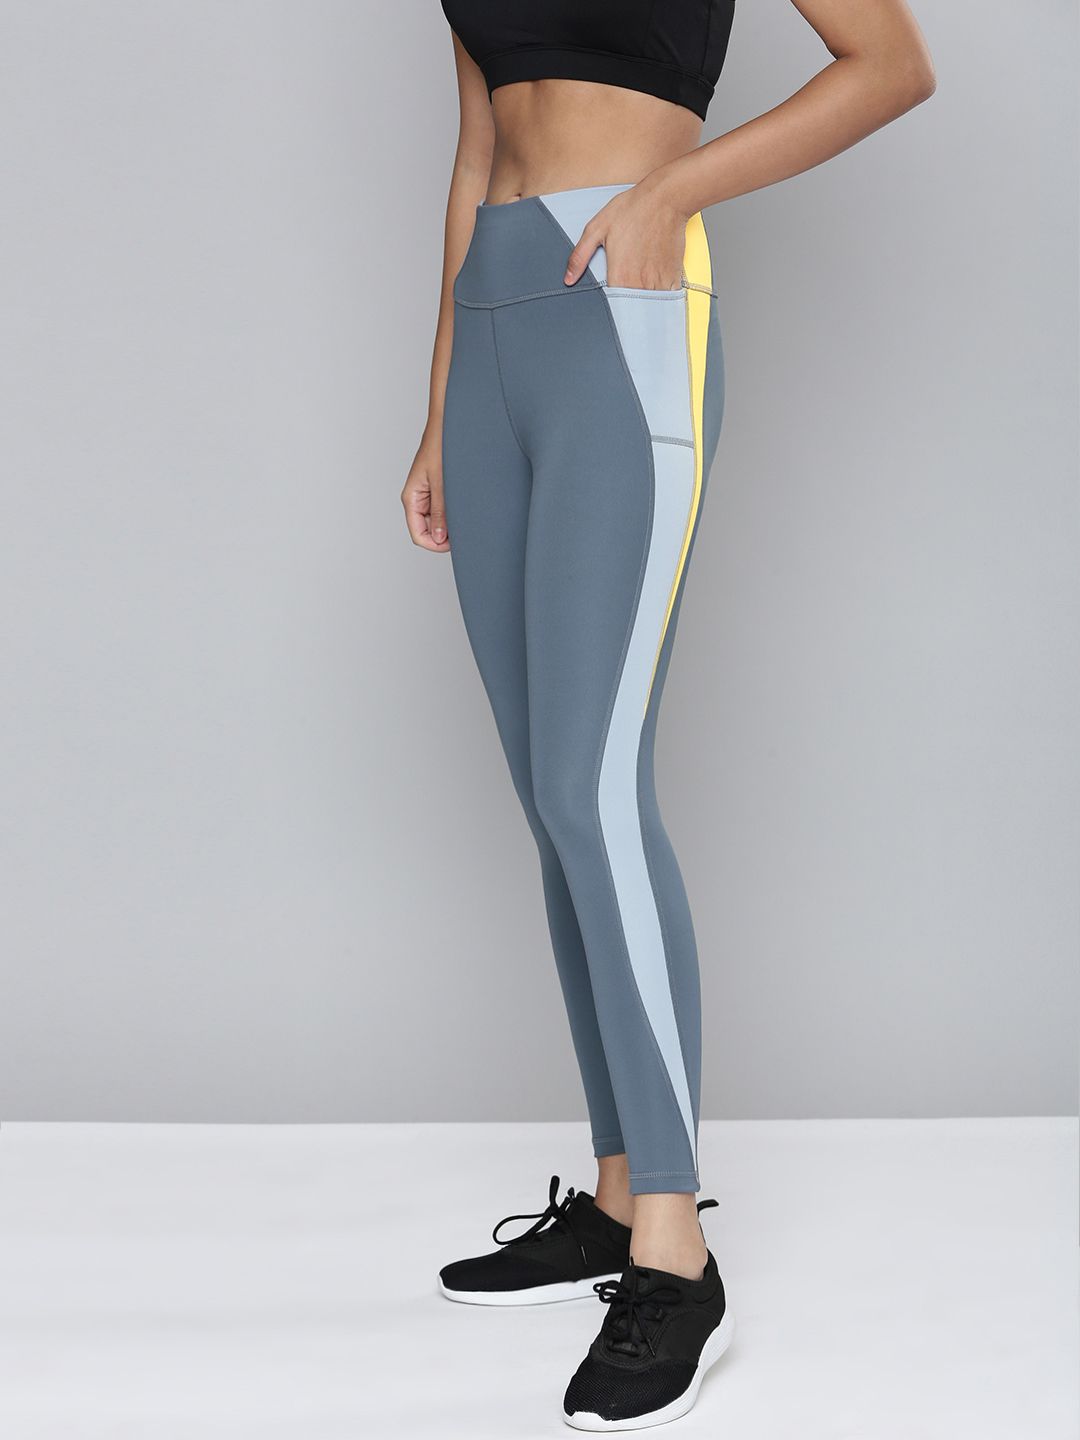 Puma Women Grey Solid dryCELL Evostripe Tights Price in India